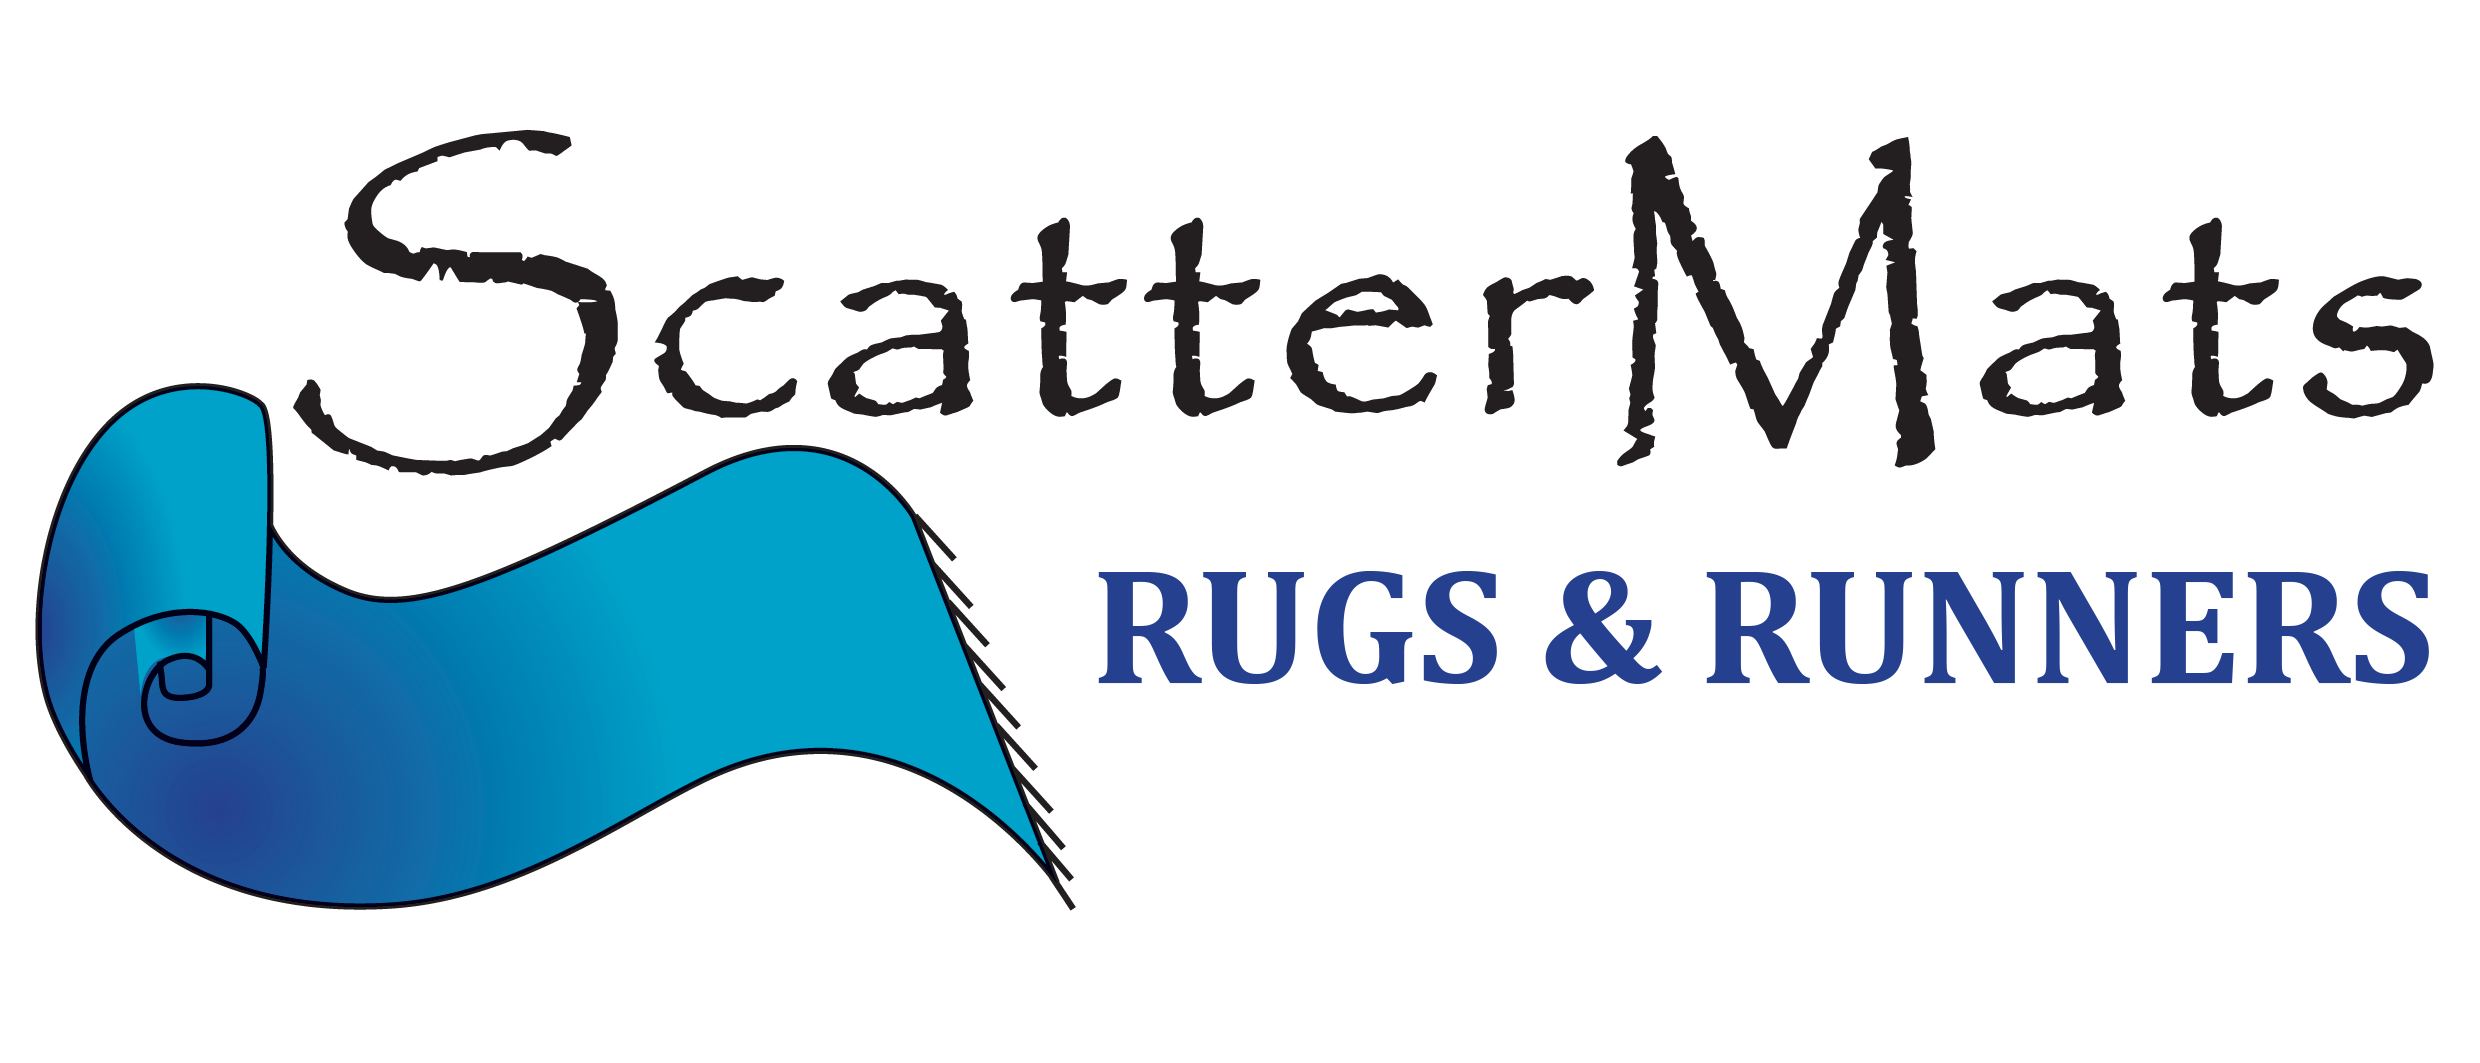 ScatterMats Rugs & Runners